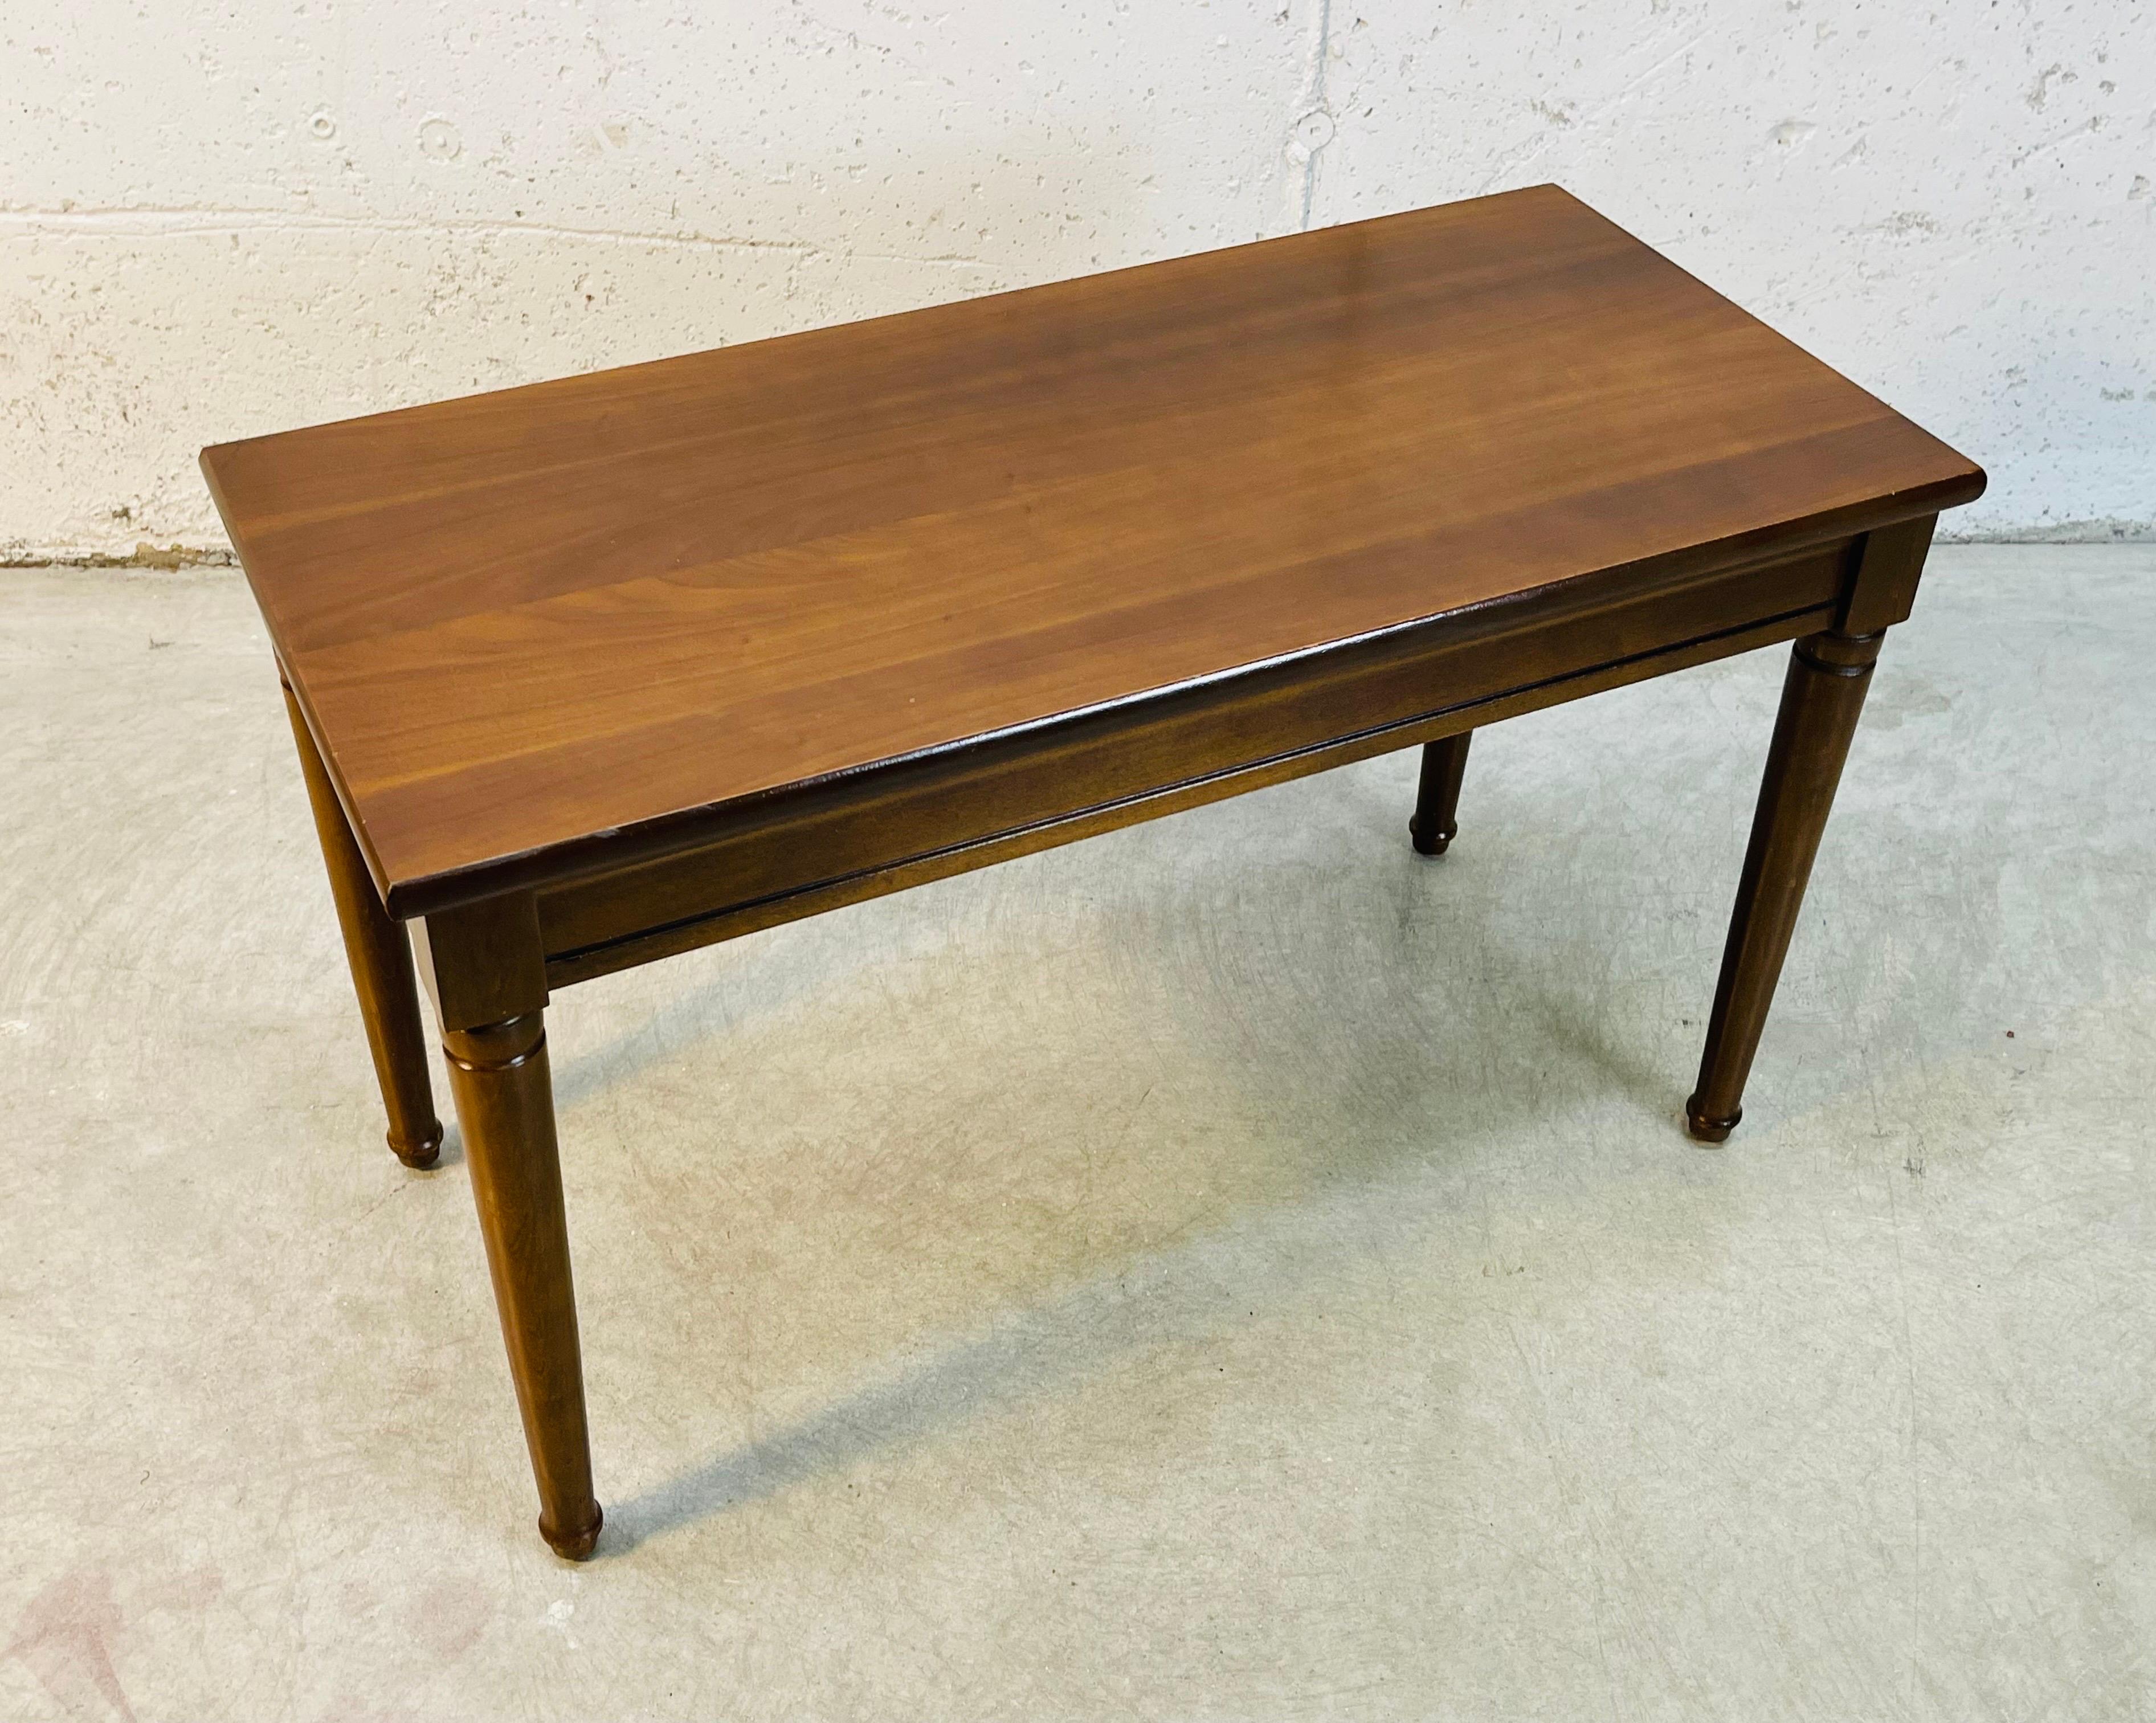 Vintage 1960s rectangular mahogany wood piano bench with storage for sheet music. The seat lifts for storage. The bench is solid and sturdy. No marks.